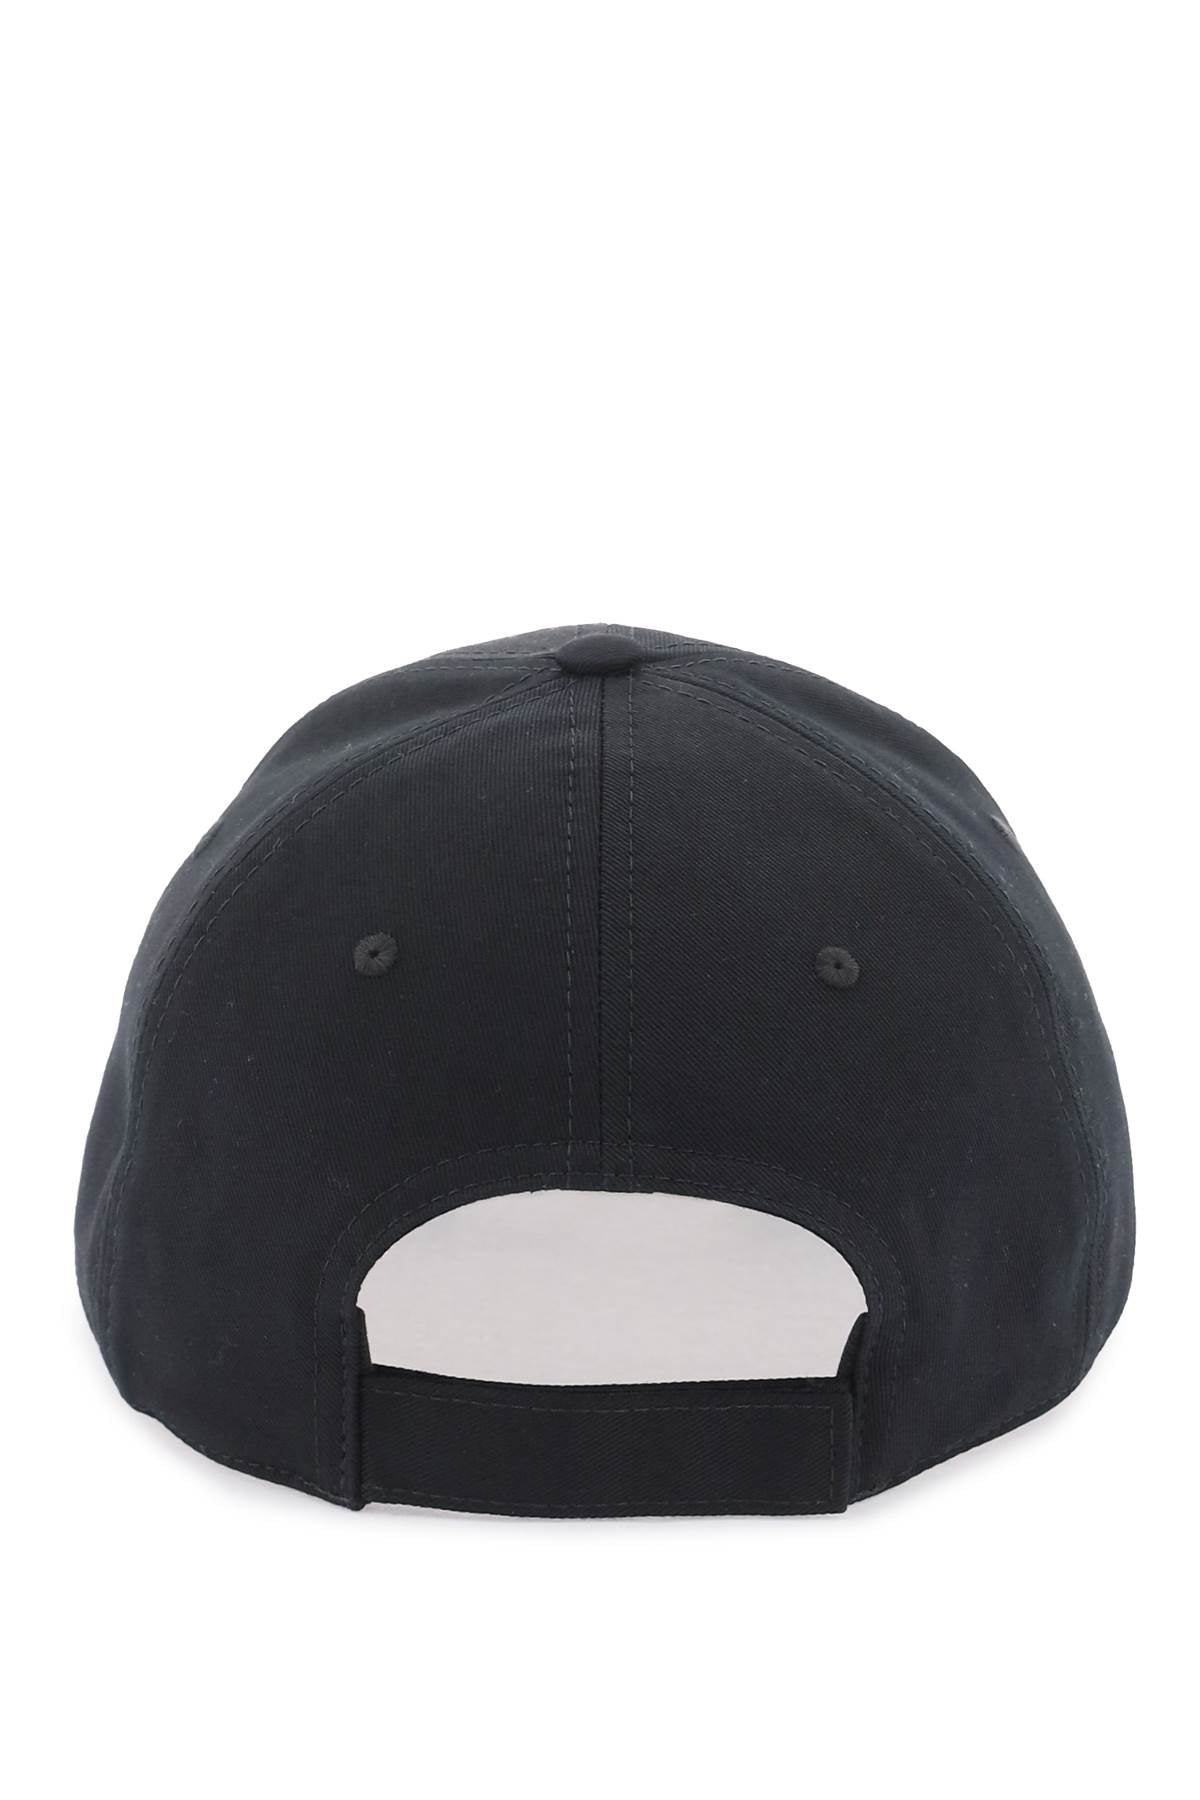 Marni embroidered logo baseball cap with-men > accessories > scarves hats & gloves > hats-Marni-Urbanheer